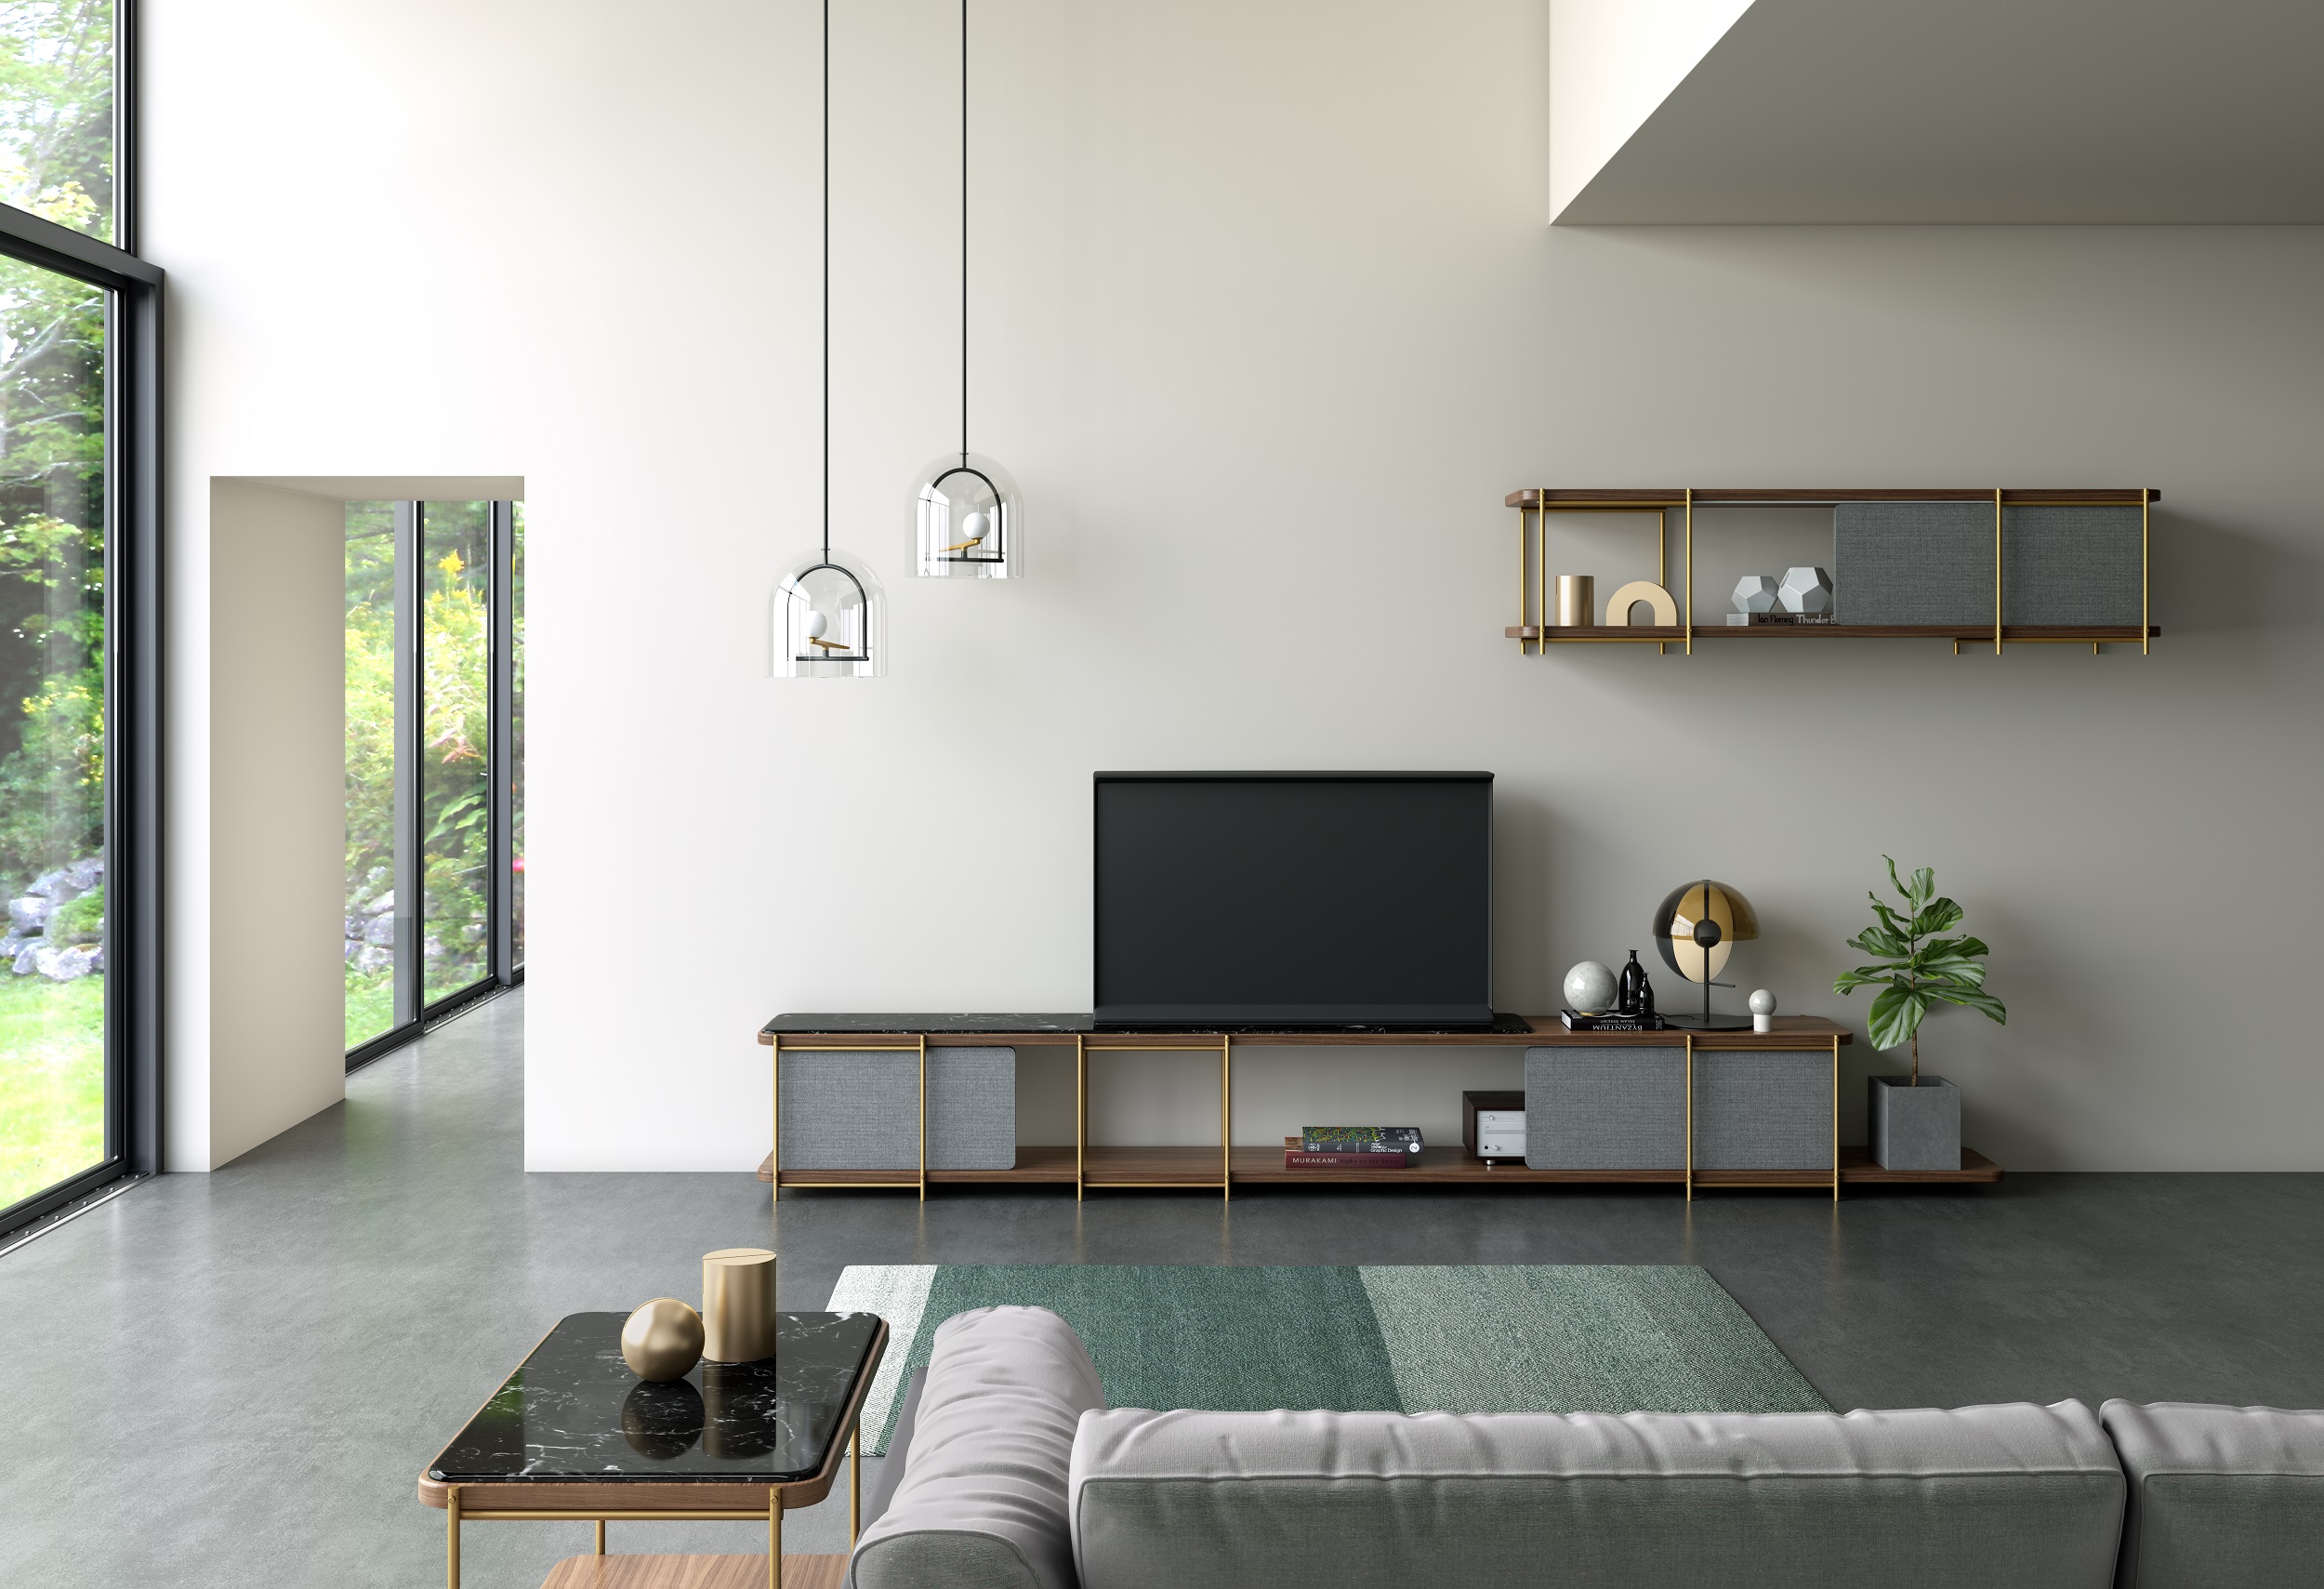 "Julia," the new modular furniture system from Momocca, being used as an entertainment center. 